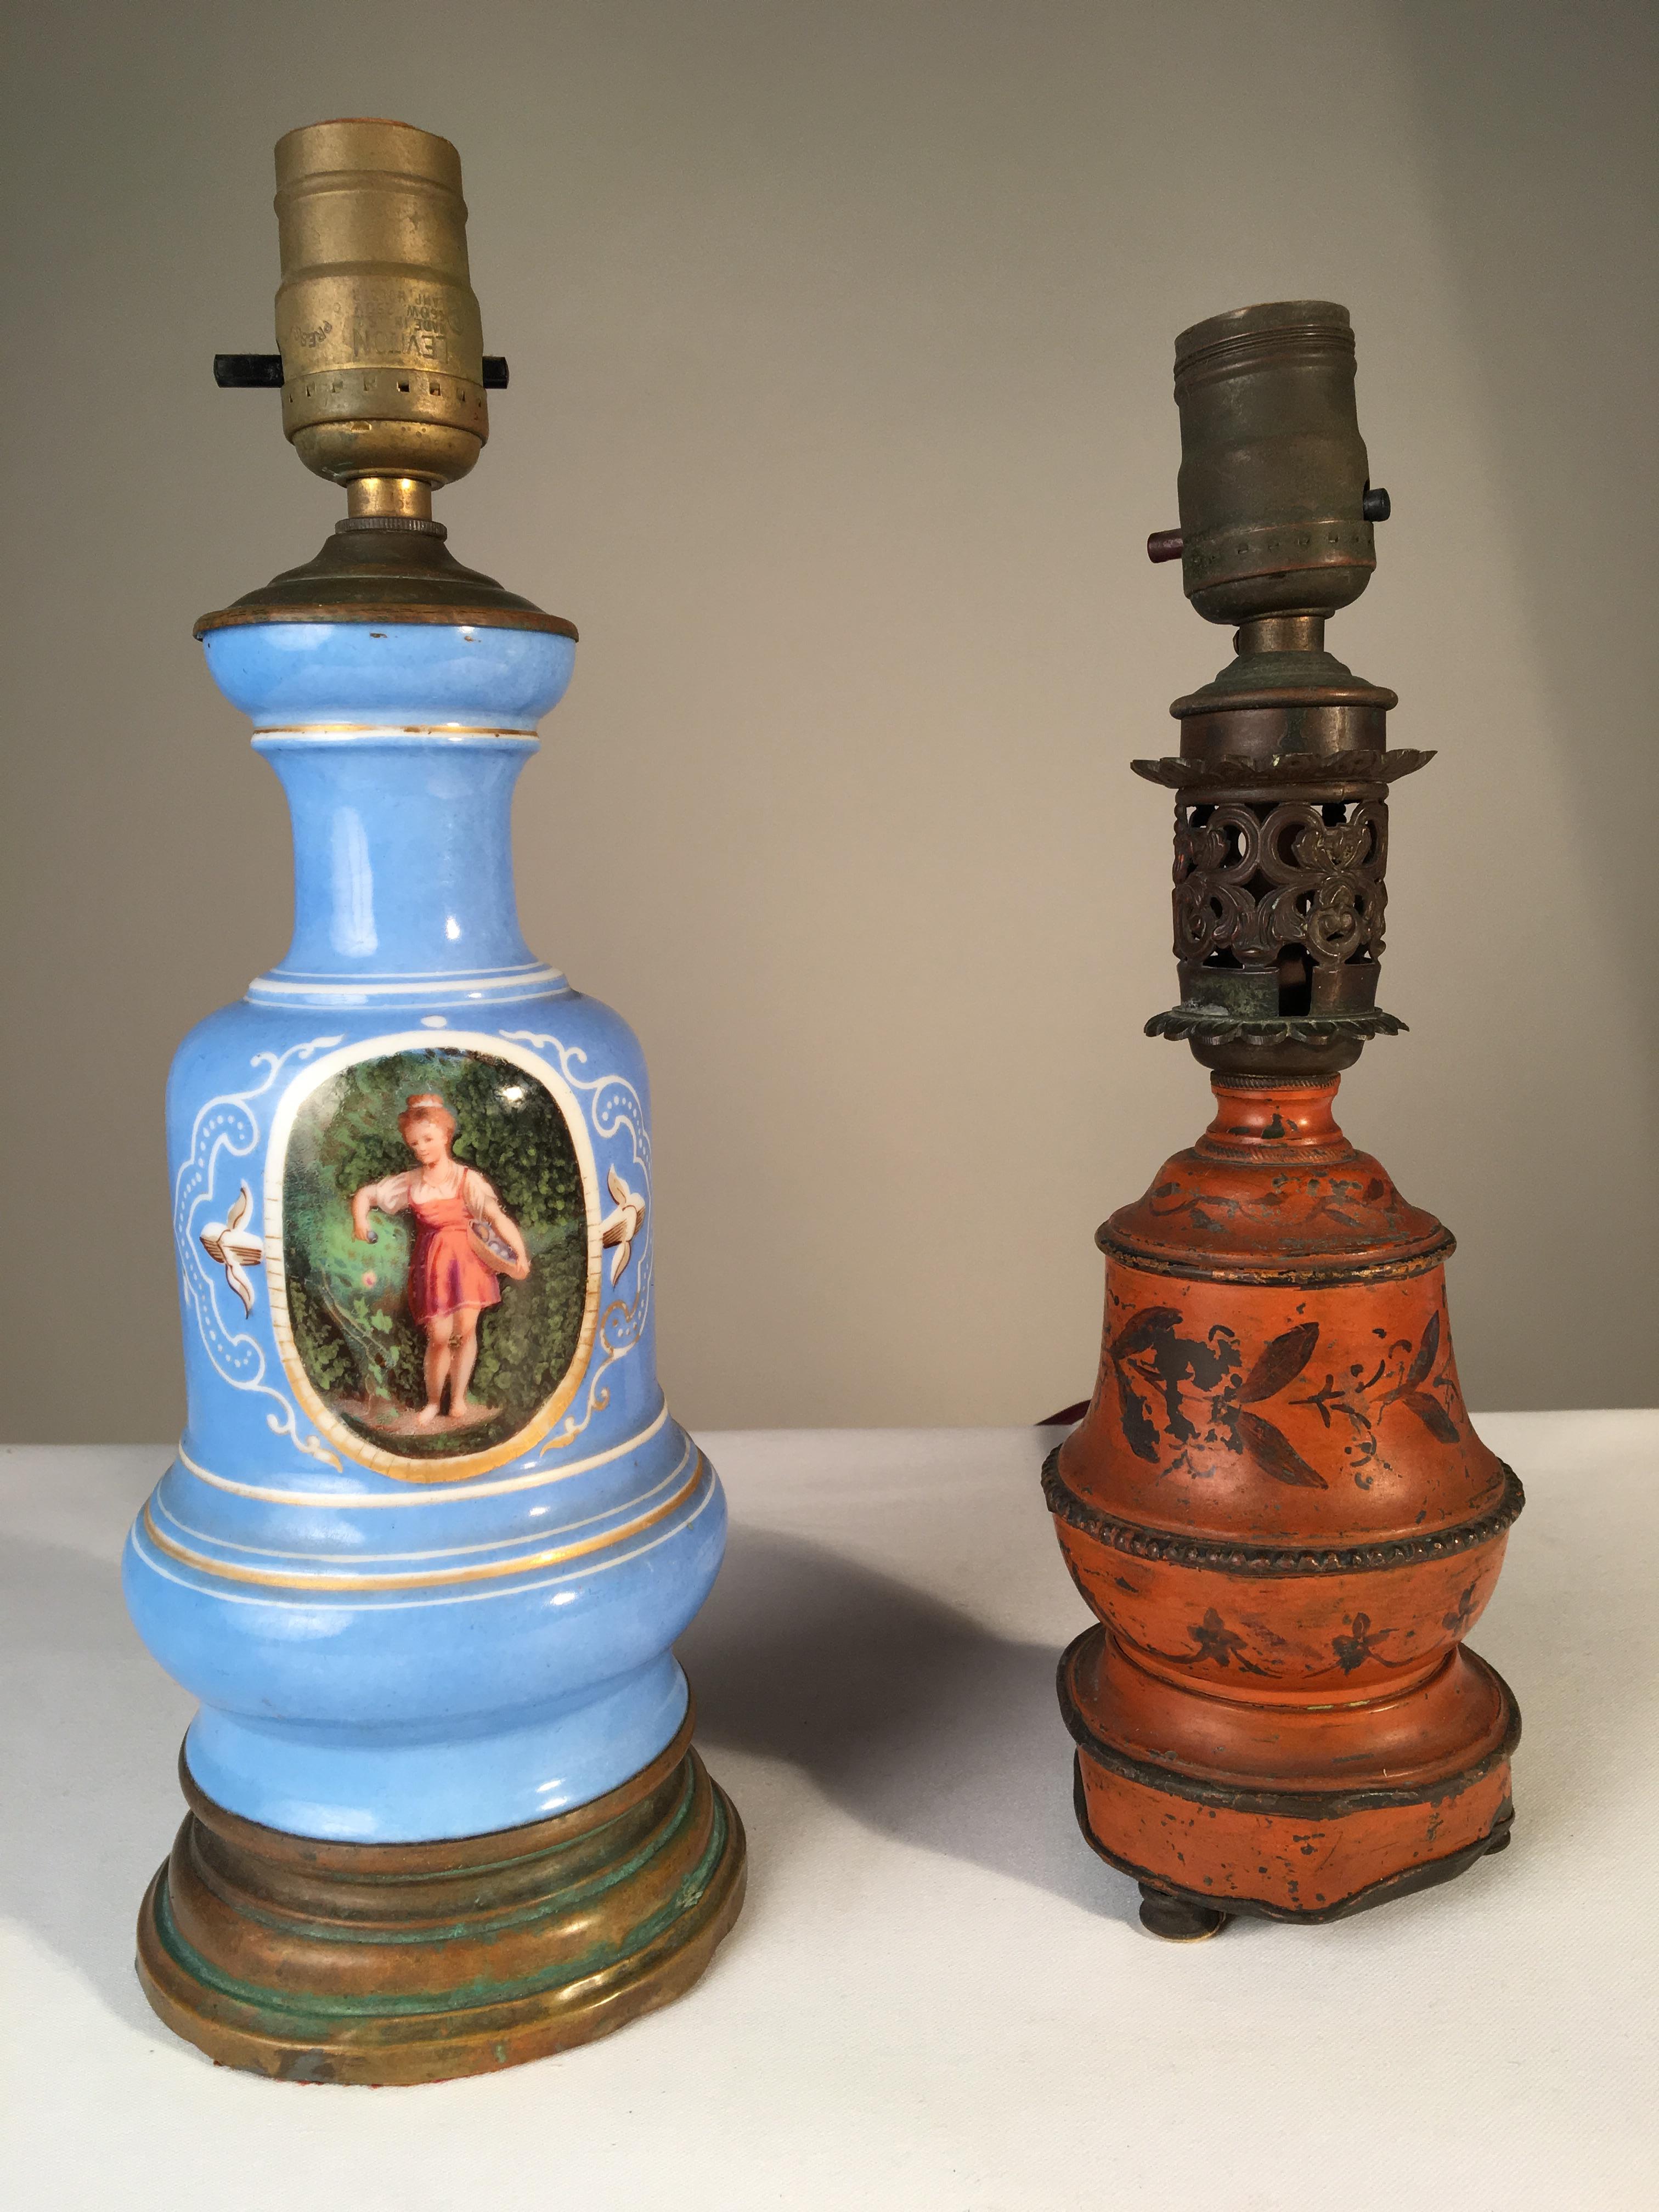 Two antique French table lamps, one blue porcelain with painted classical figure in a central cartouche, and the other a small tole lamp in a dark orange painted finish, both converted from earlier oil lamps.